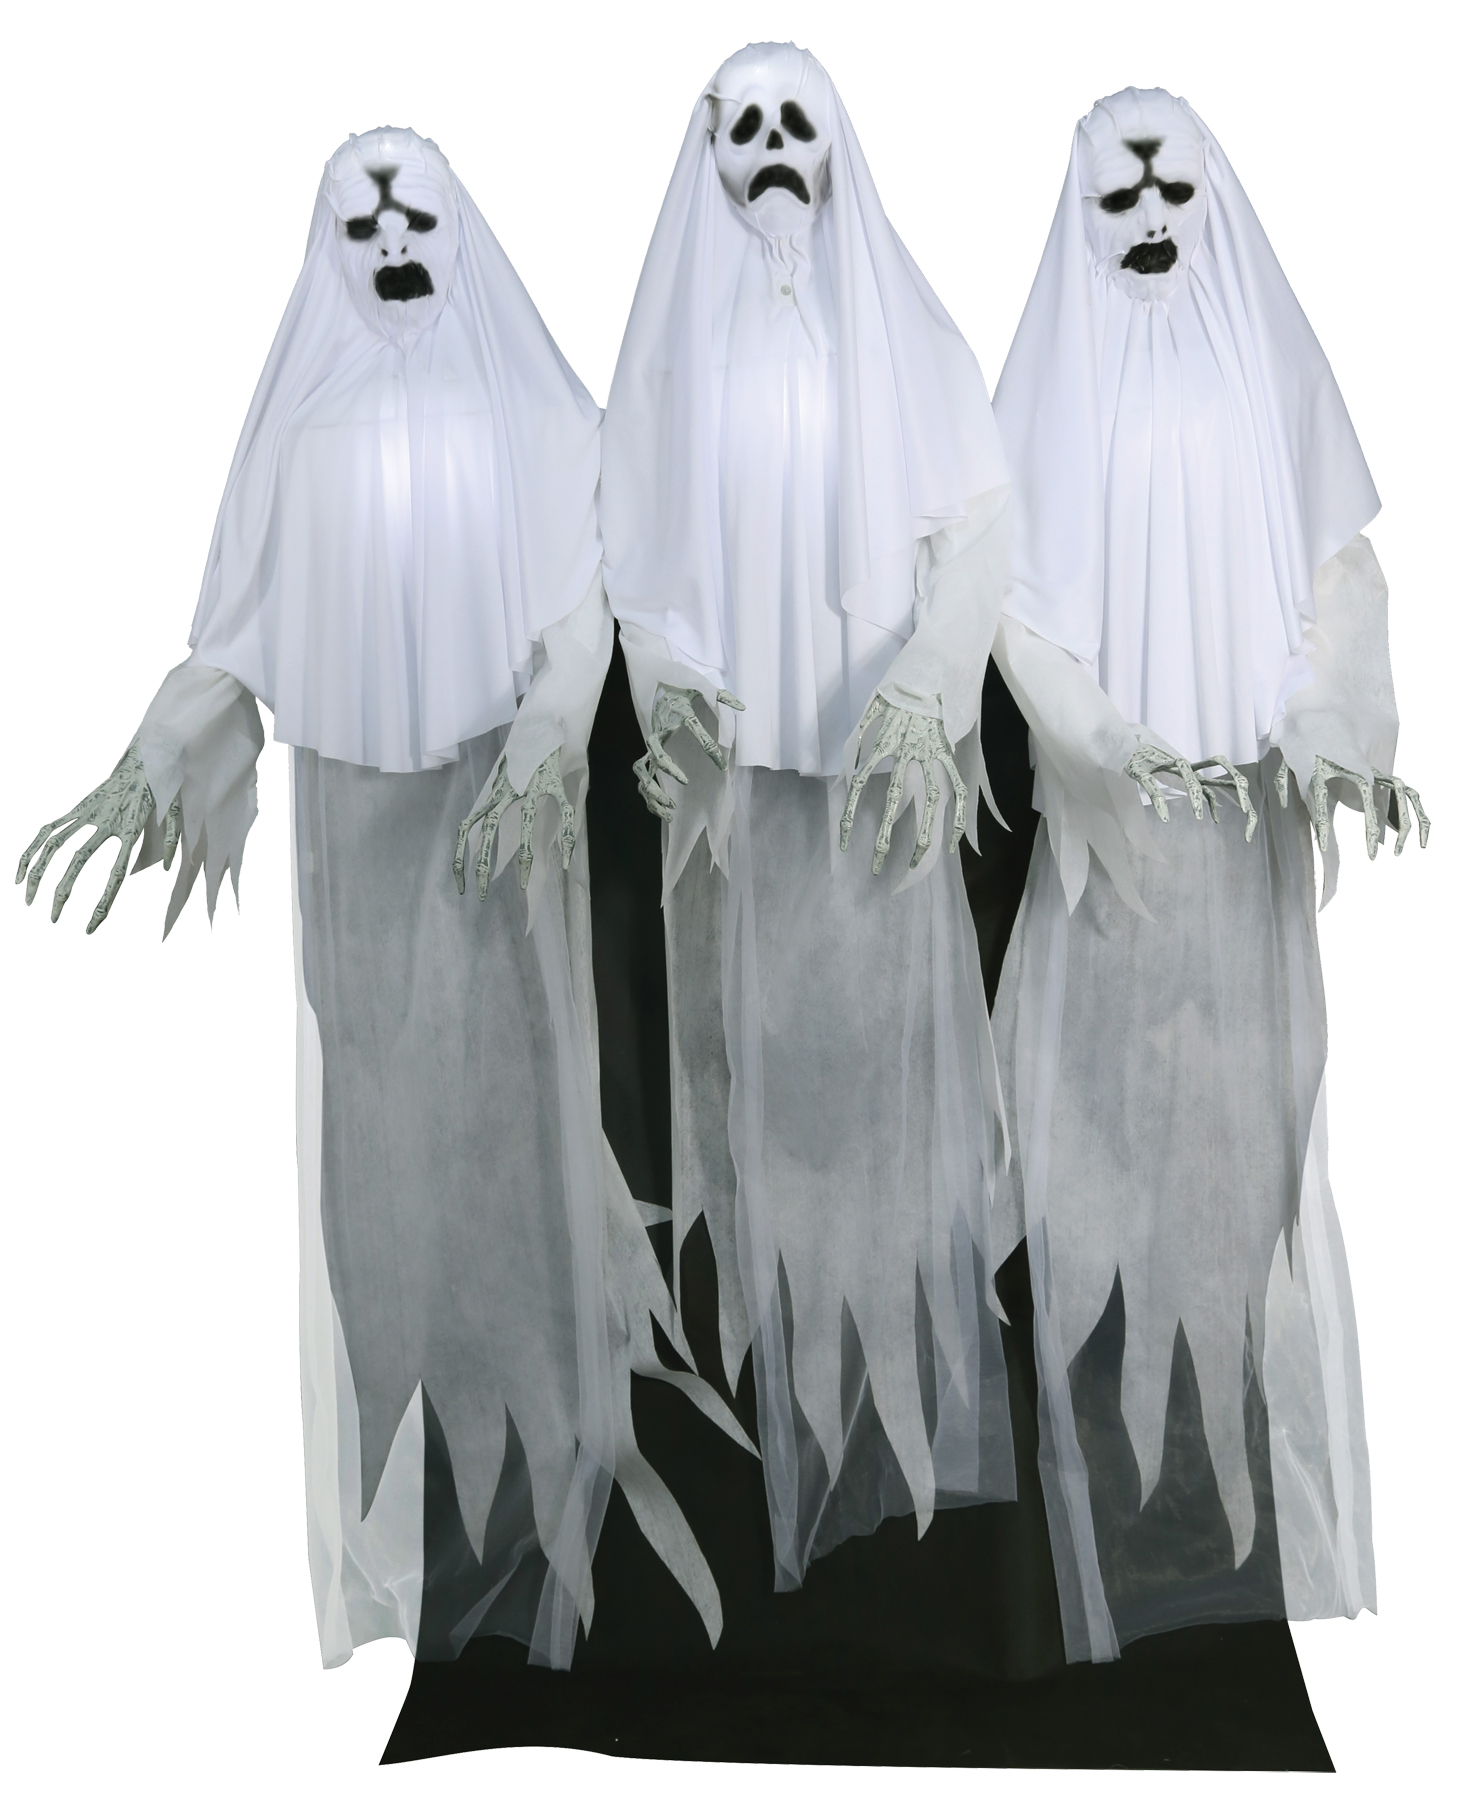 Haunting Ghost Trio Animated